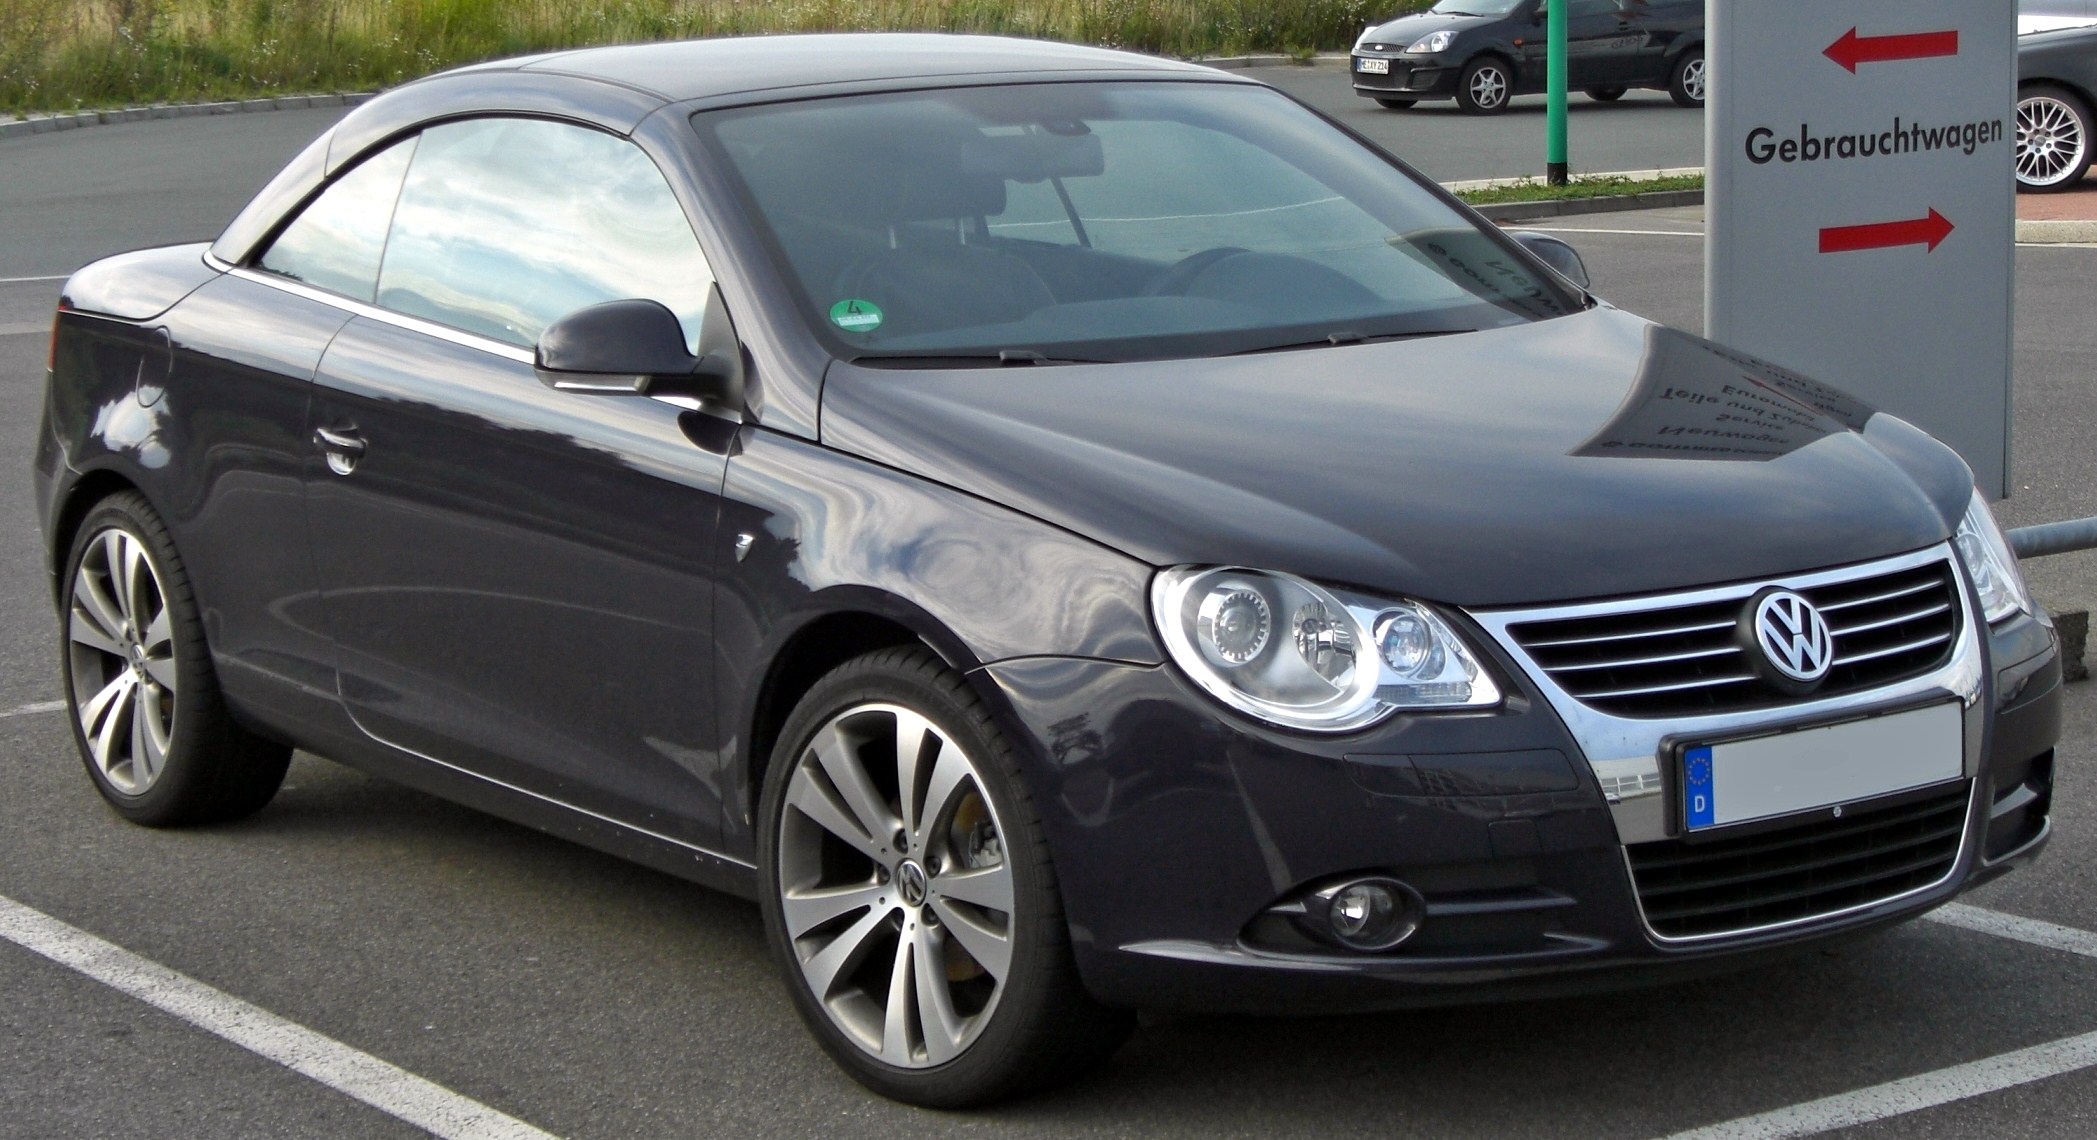 File:VW Eos front-3.JPG - Wikimedia Commons